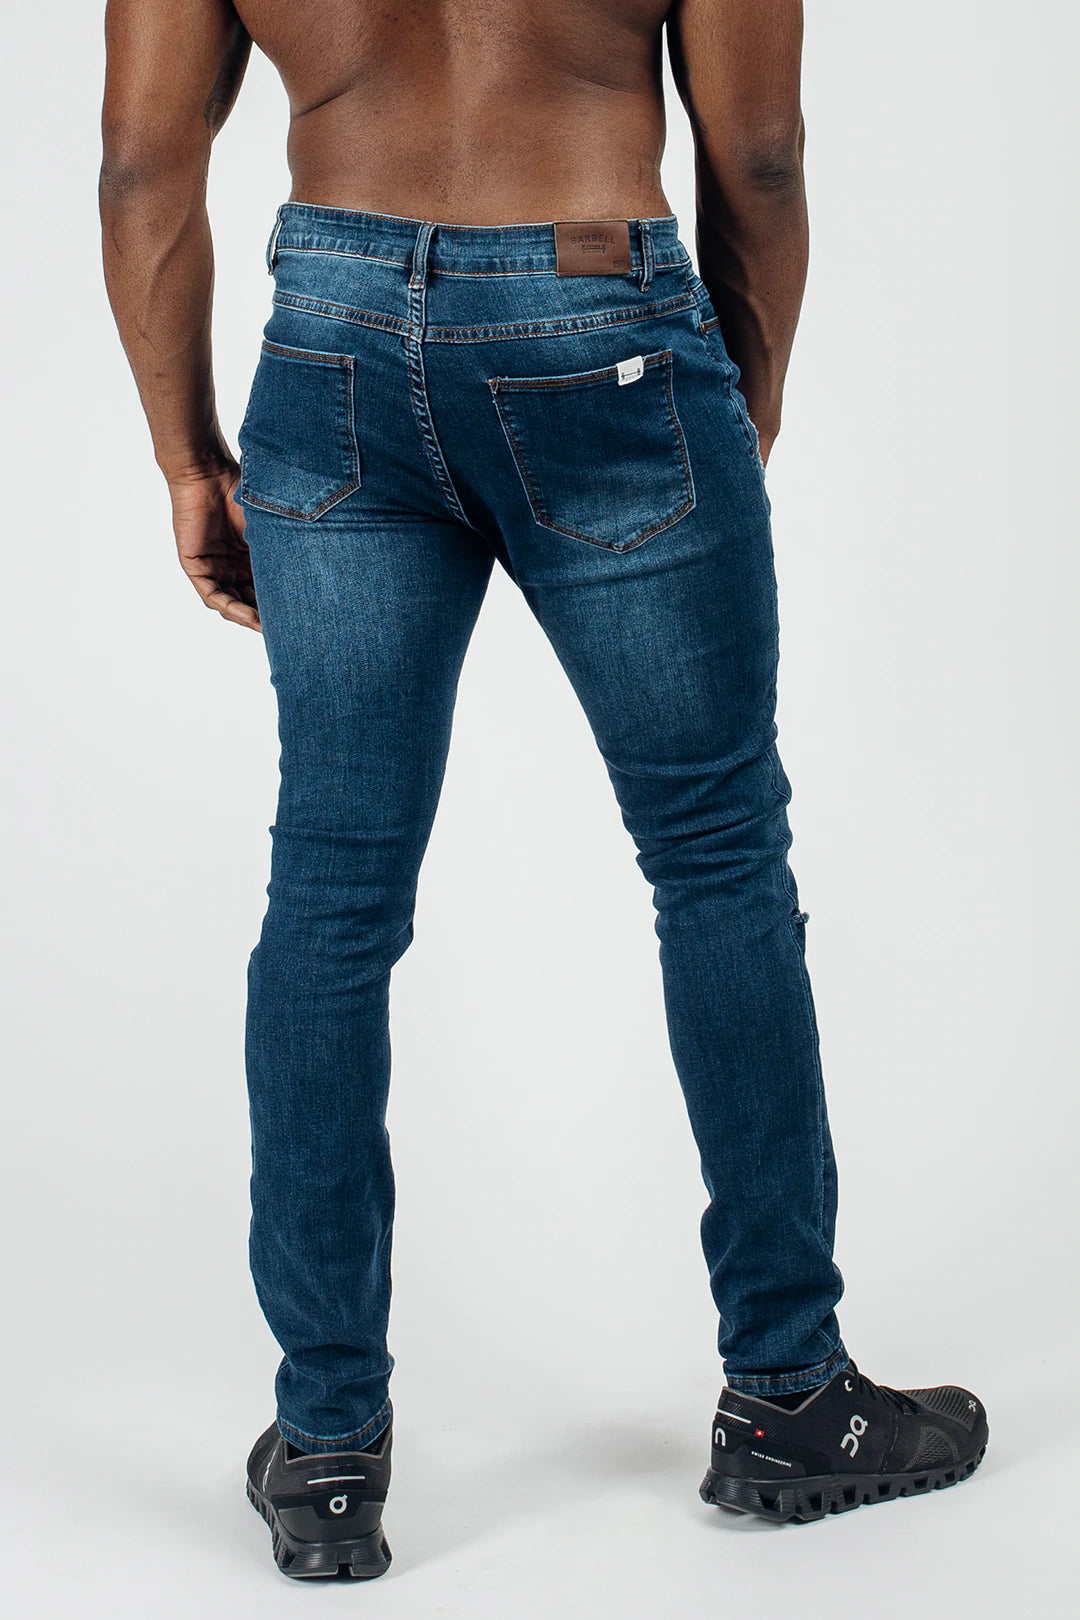 Slim Athletic Fit Destroyed Jeans - Medium Distressed - photo from back #color_medium-distressed